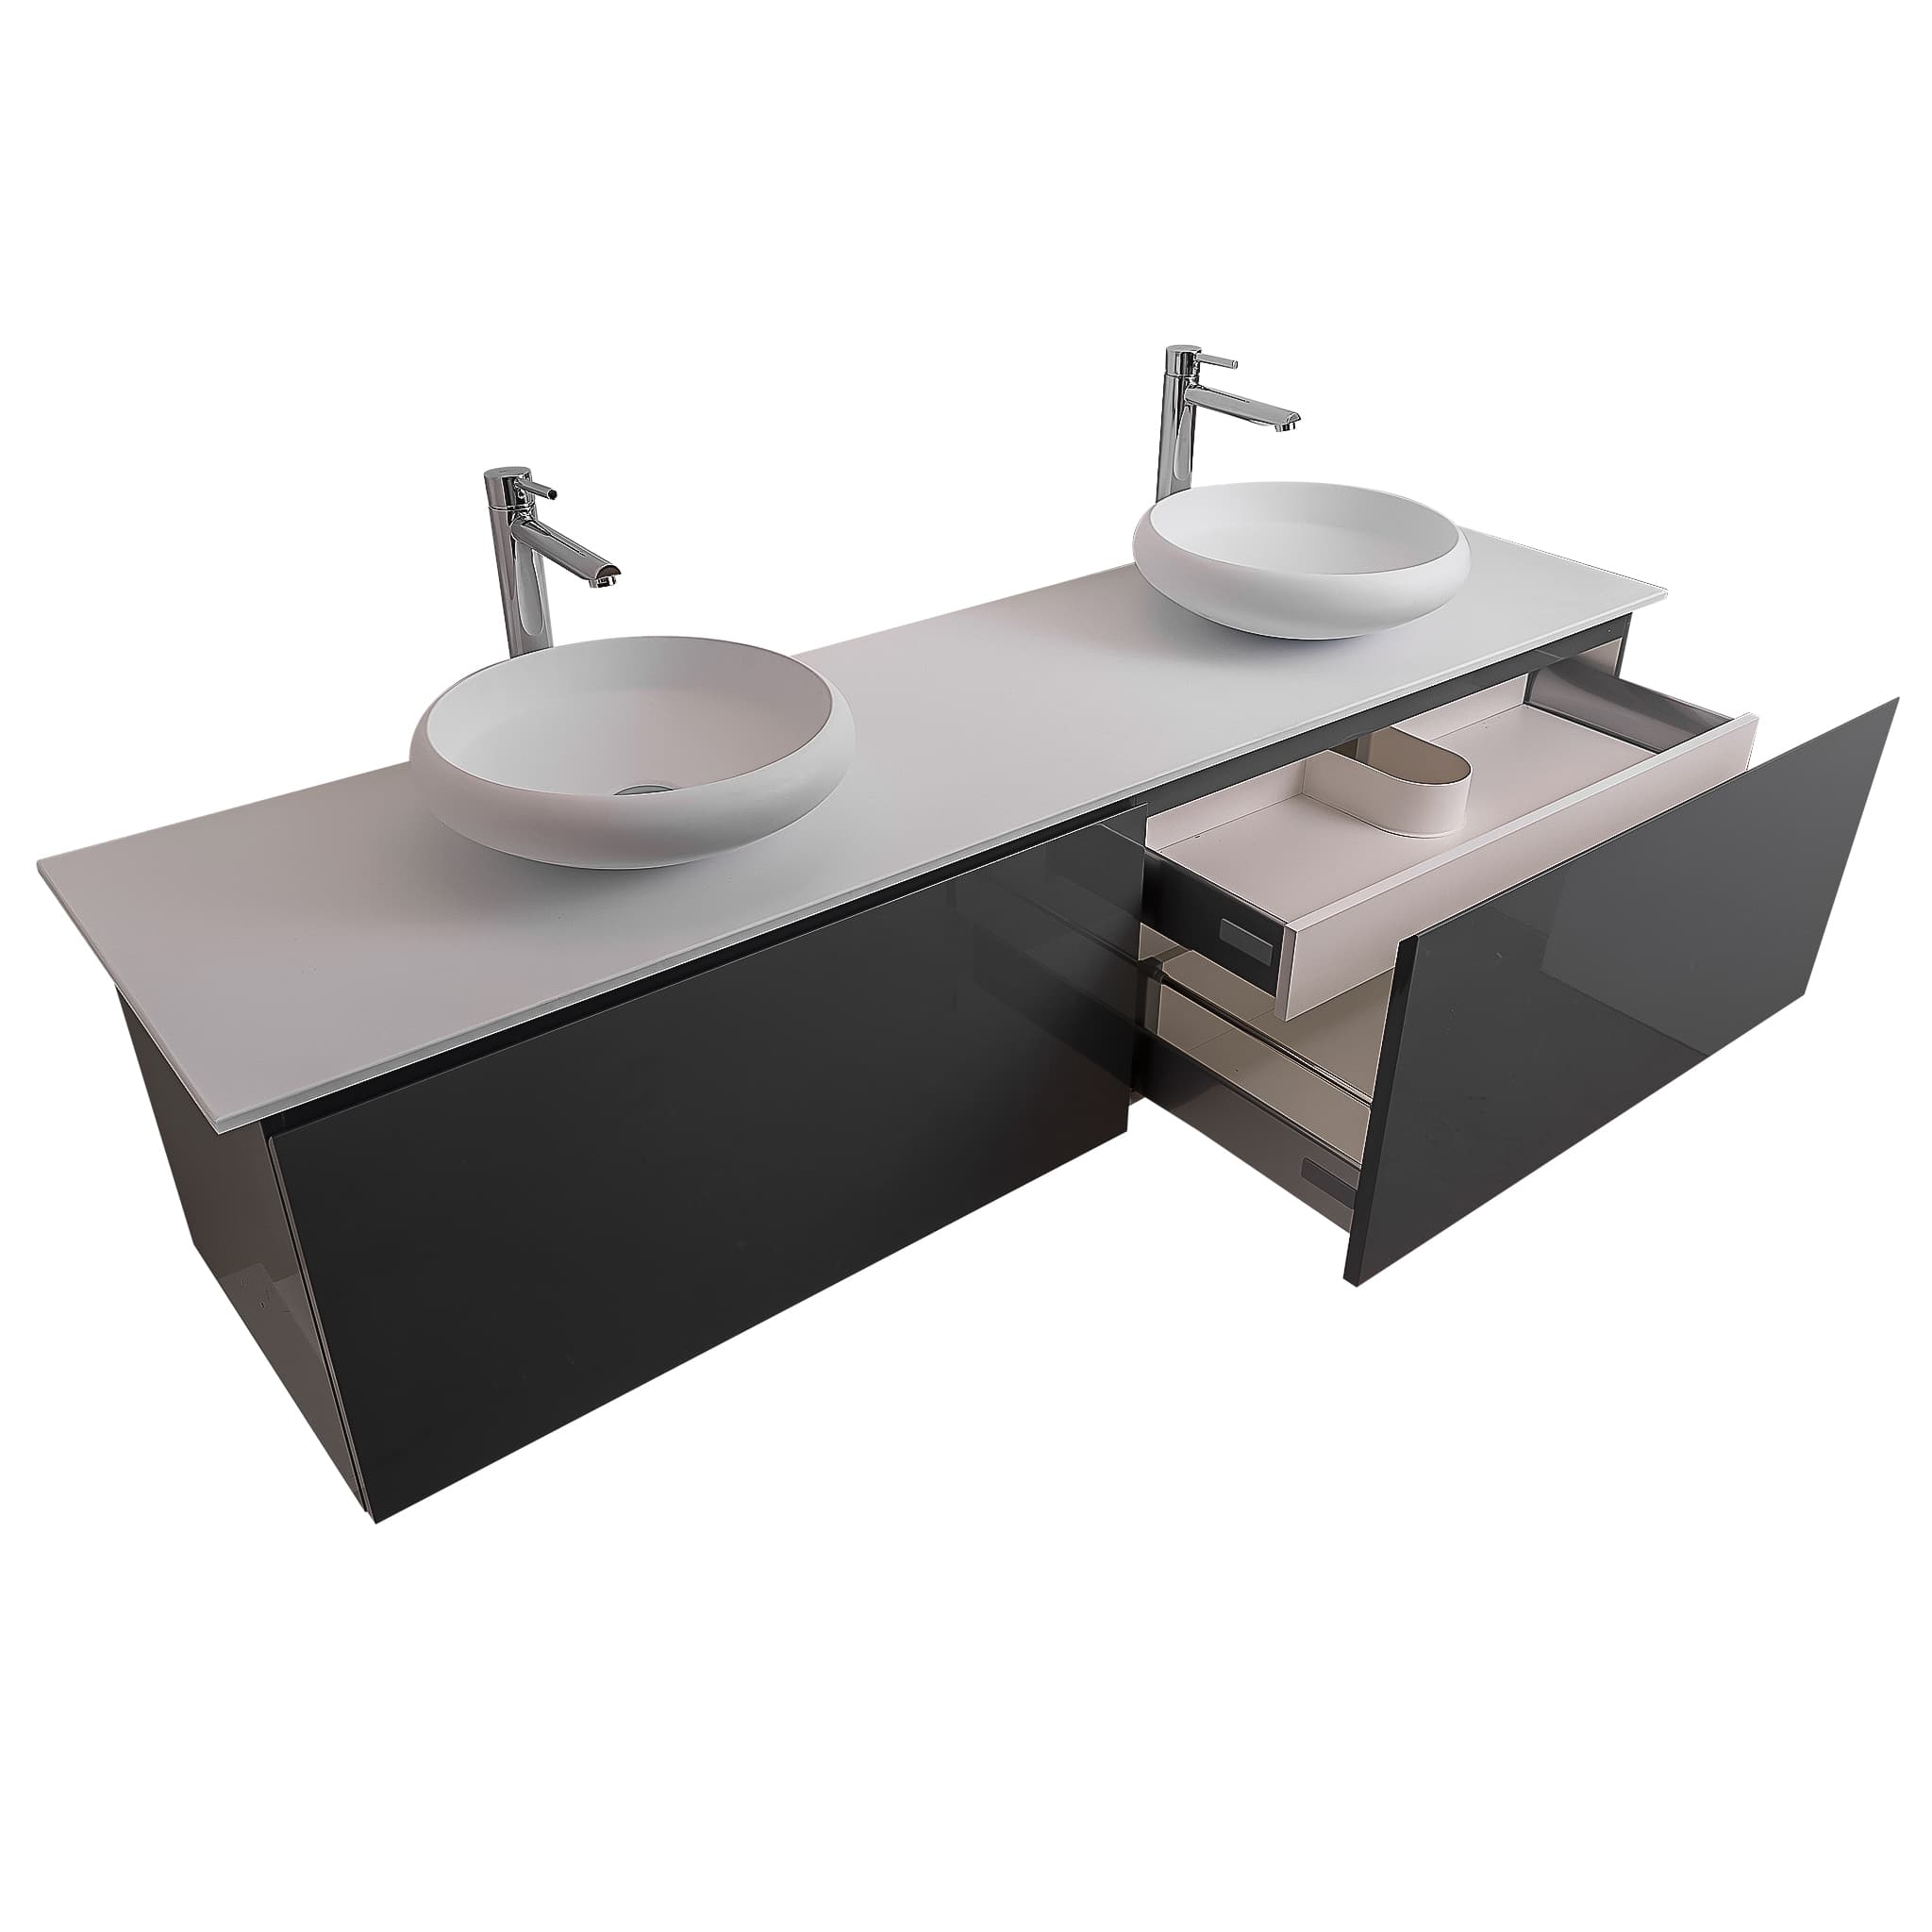 Venice 63 Anthracite High Gloss Cabinet, Solid Surface Flat White Counter And Two Round Solid Surface White Basin 1153, Wall Mounted Modern Vanity Set